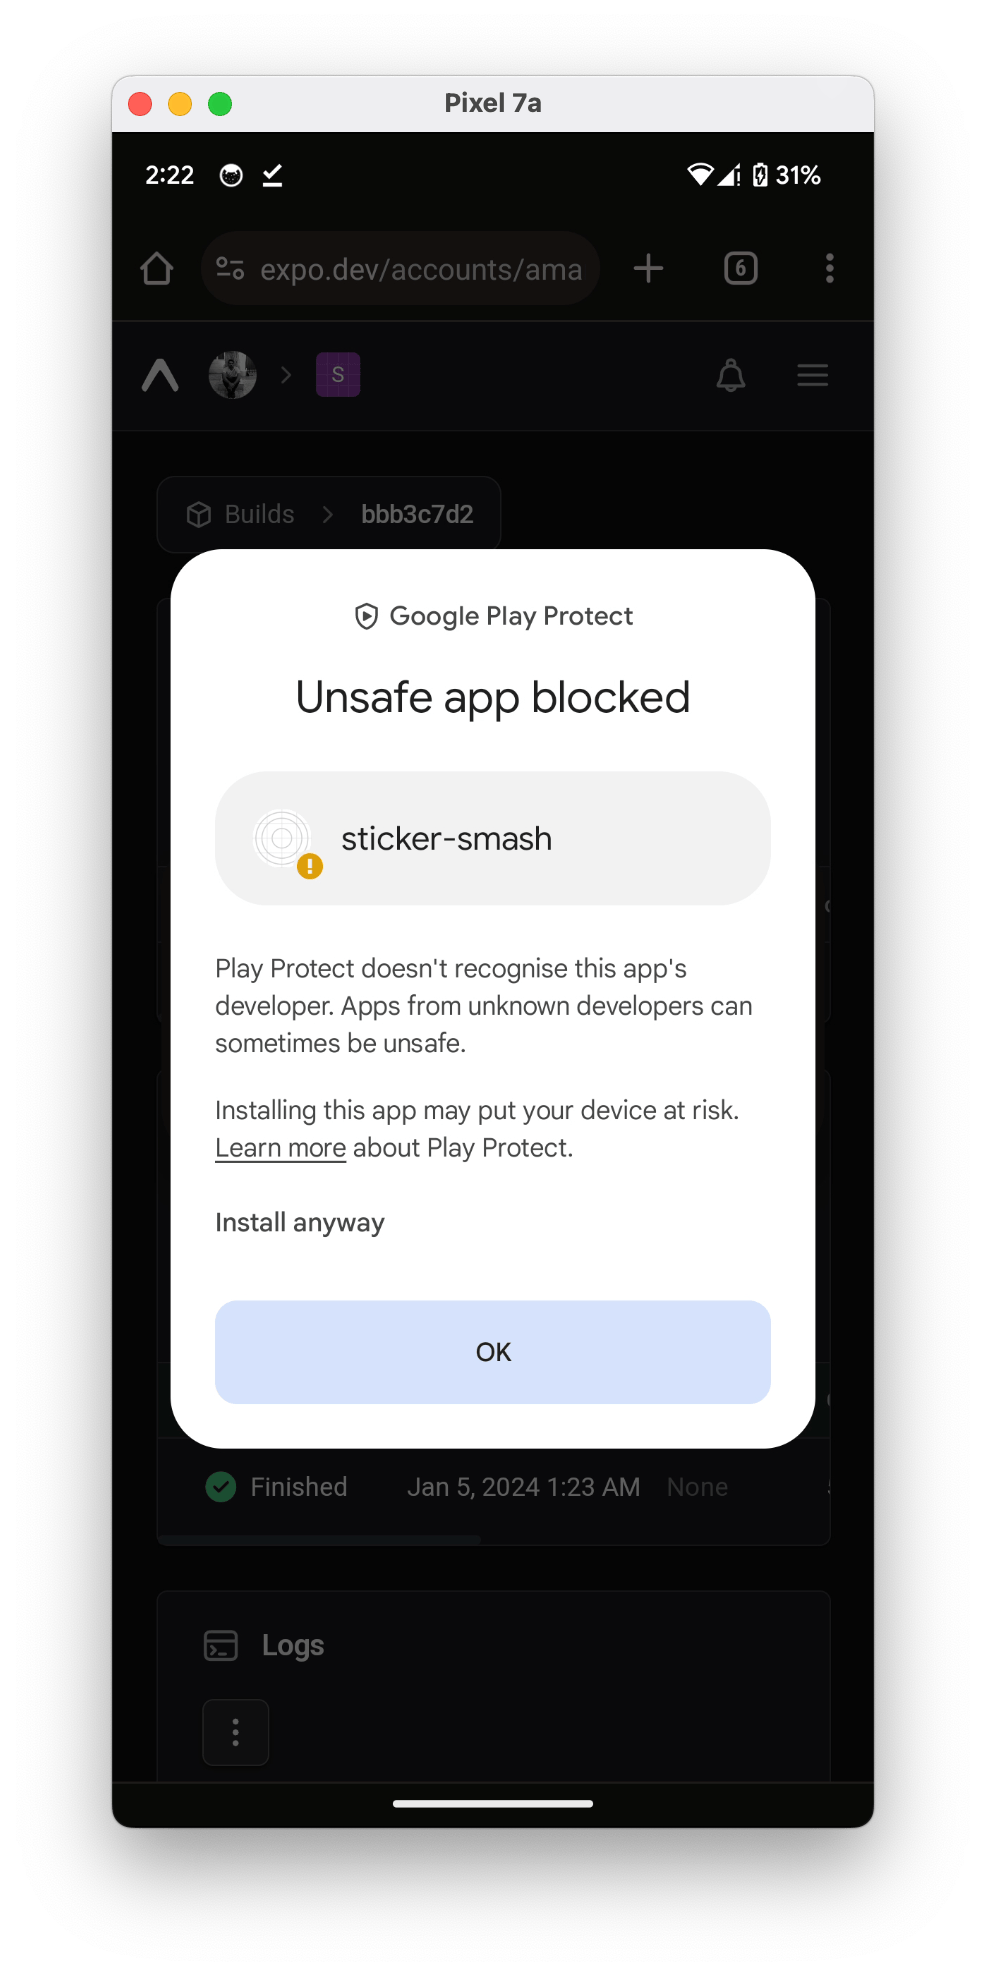 Unsafe app message dialog on Android device when installing development build